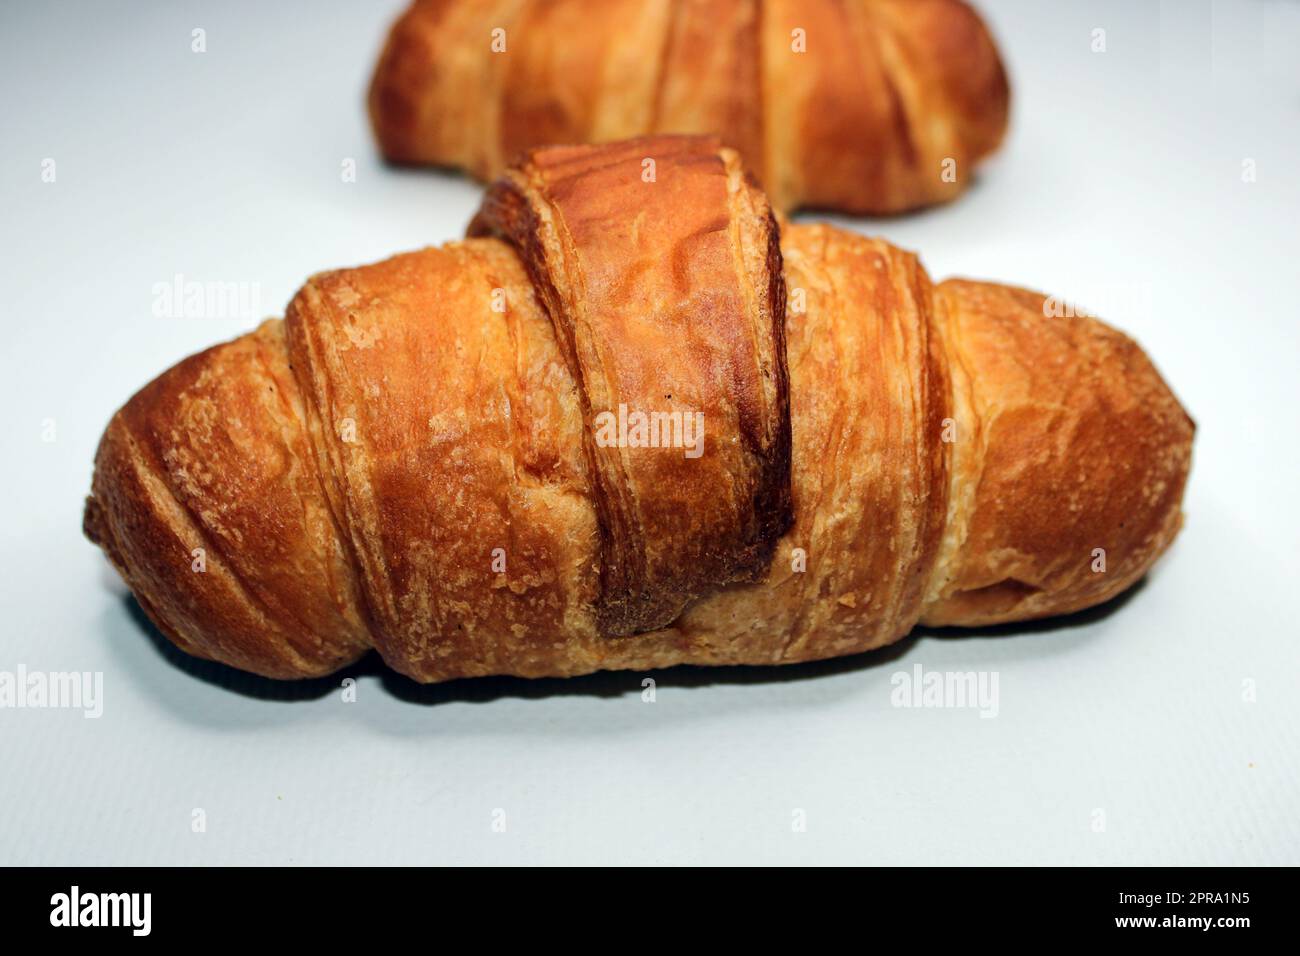 Fresh crispy croissant close-up on a light background. Blurred croissant in the background. Cooking, home baking Stock Photo